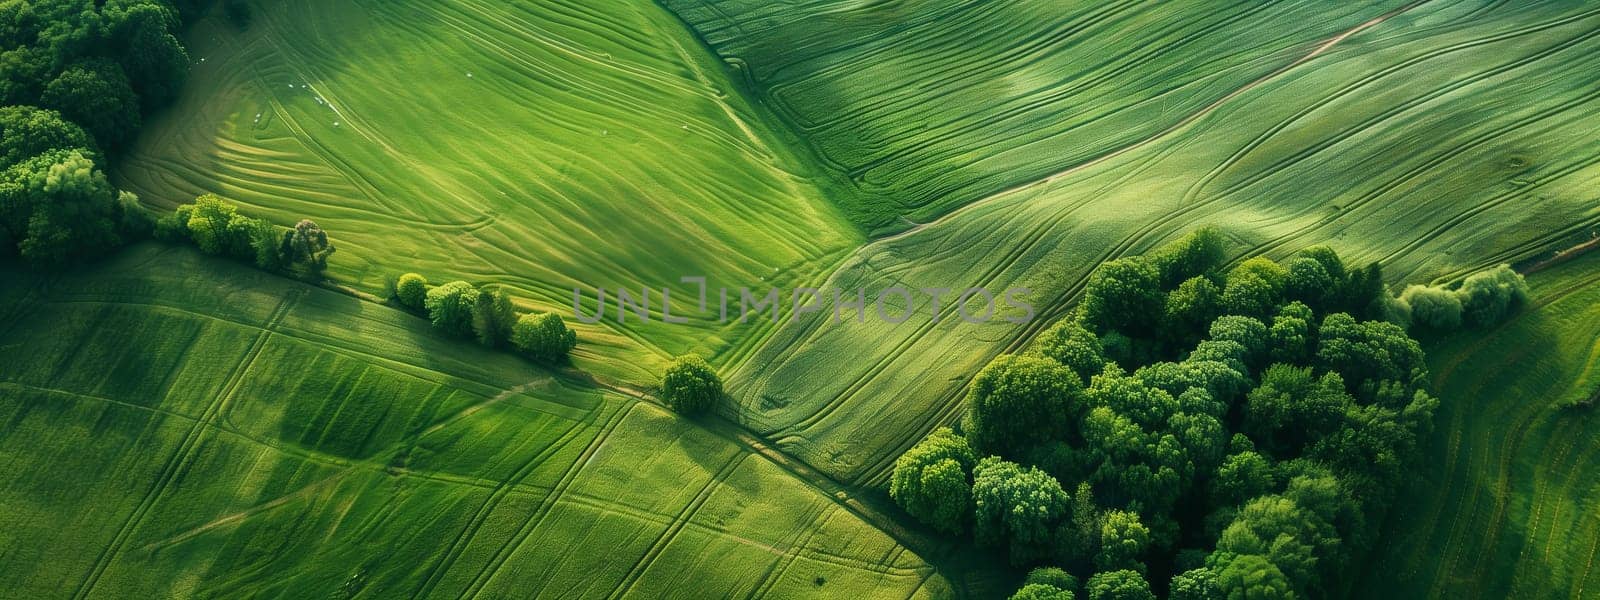 Aerial view of a grassy field with trees in the background by richwolf